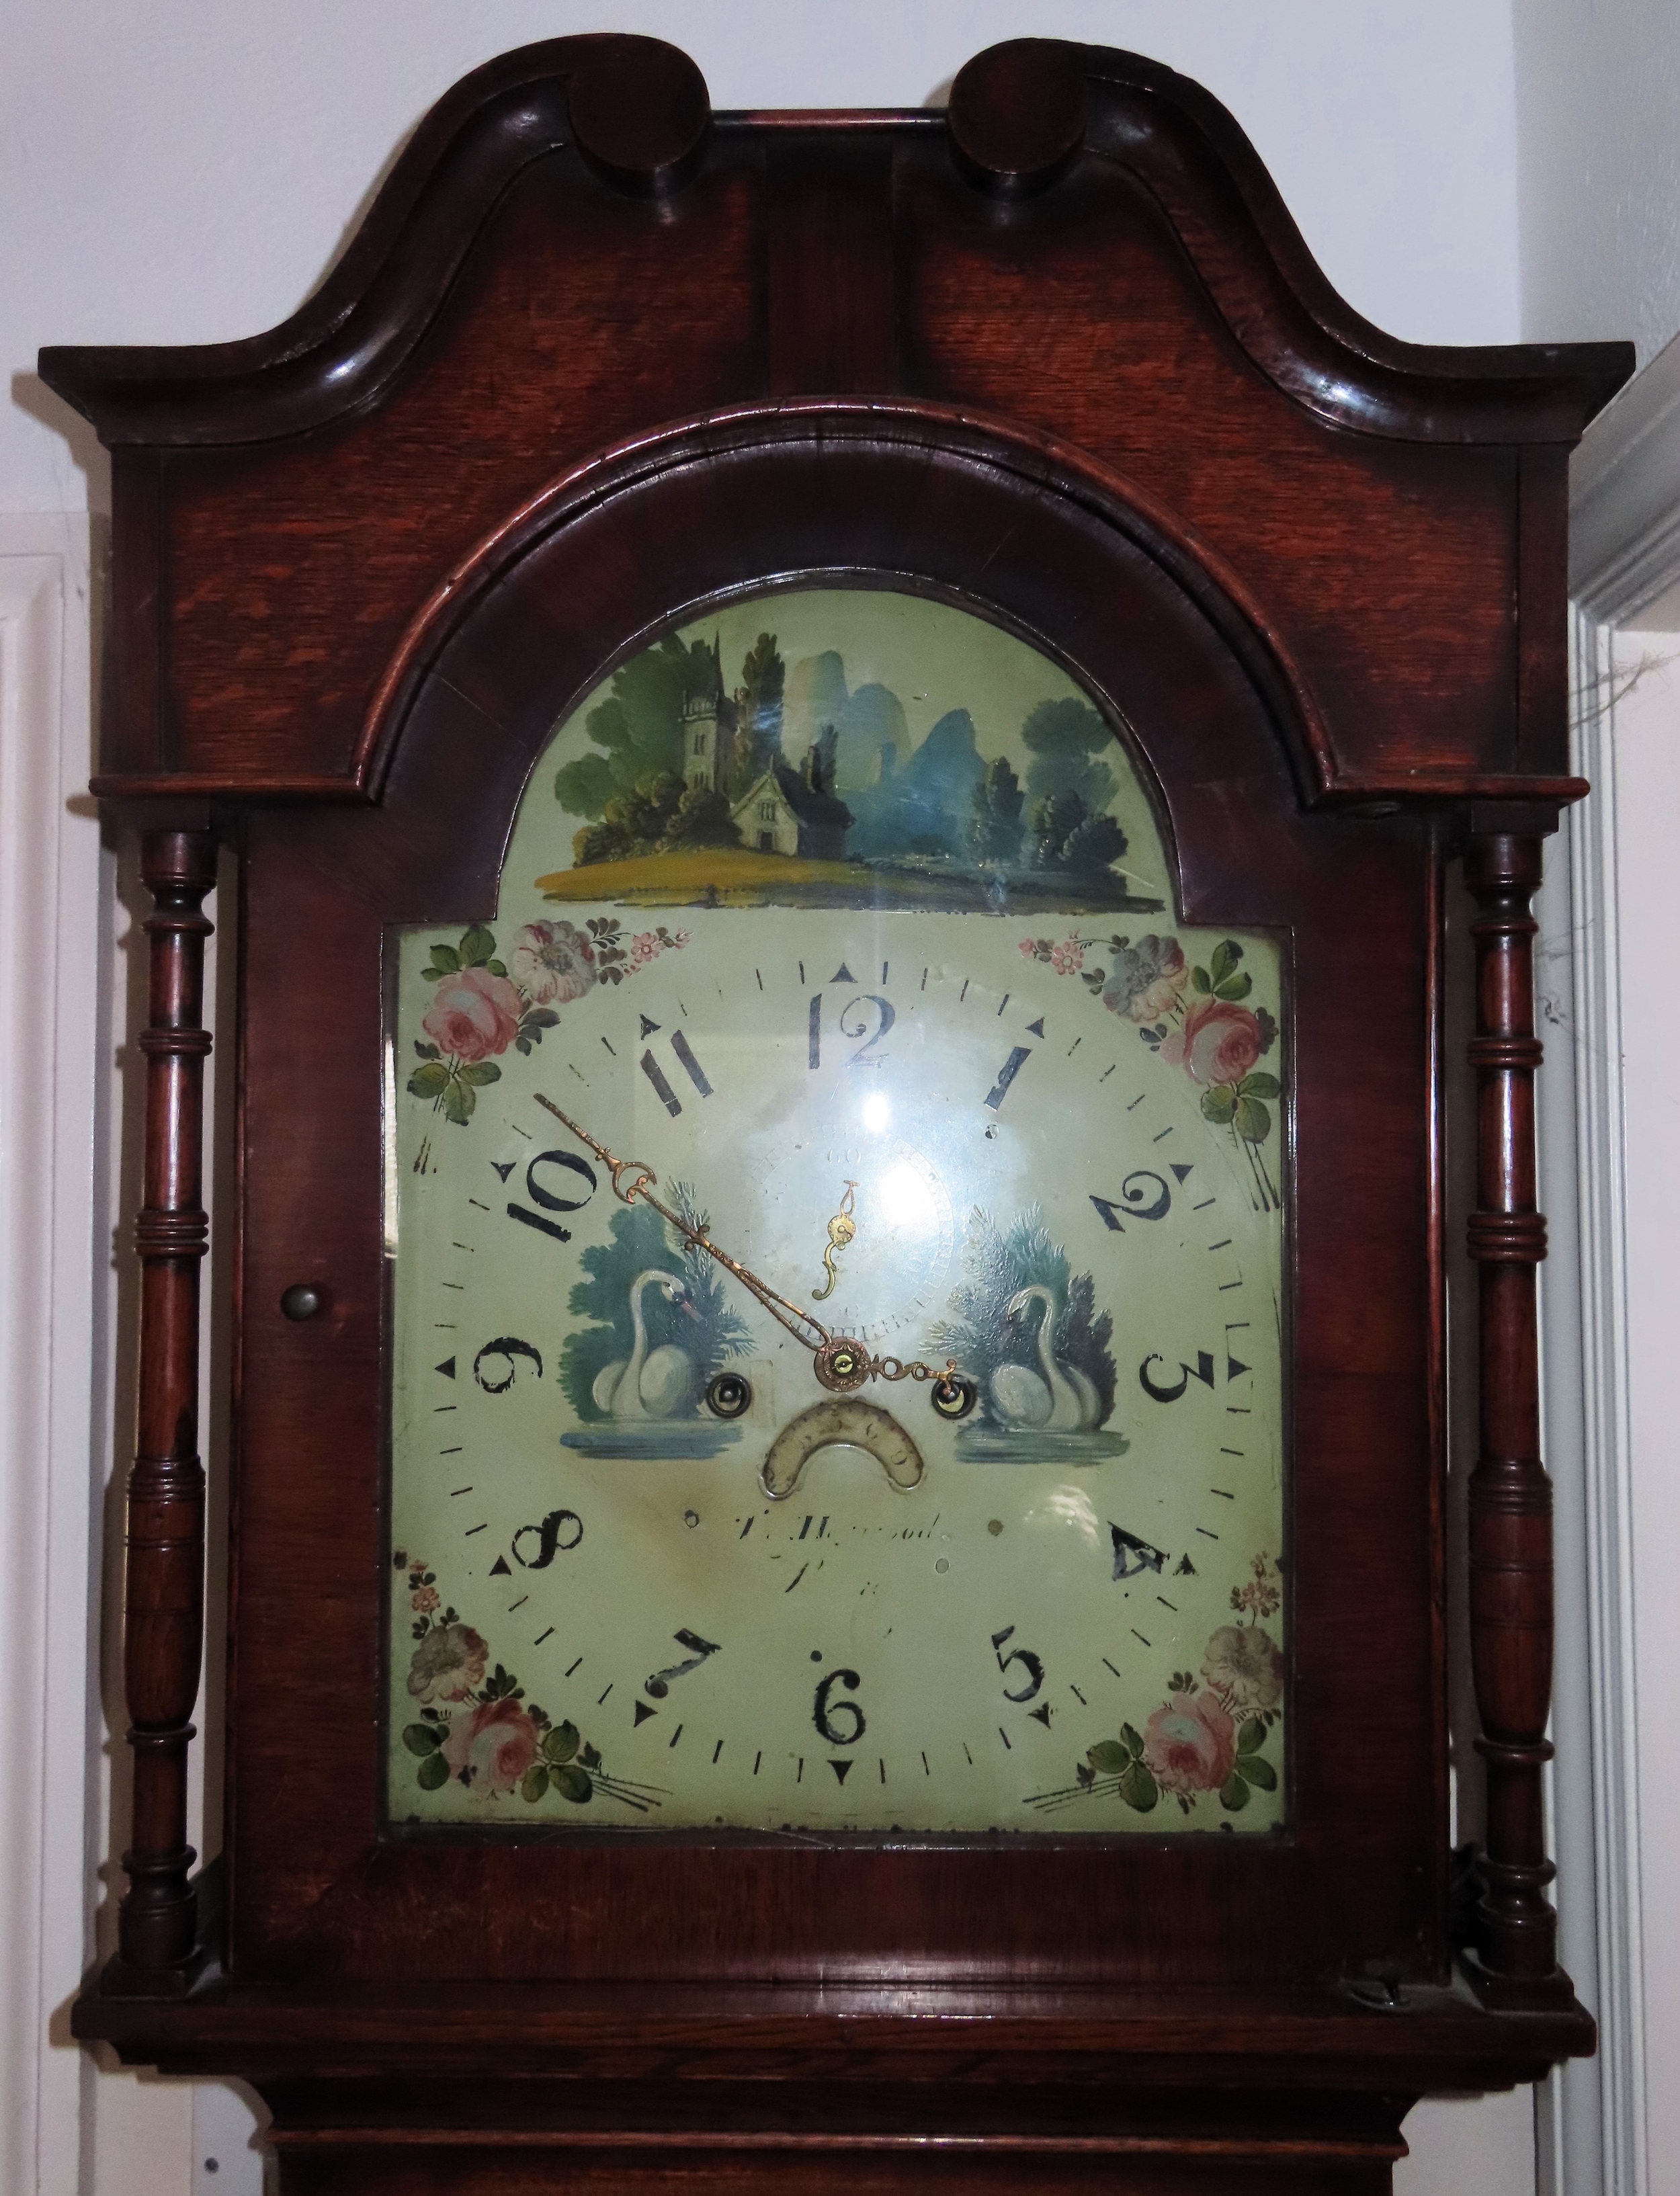 19th century Oak longcase clock by Thomas Haywood, Bangor, with handpainted and enamelled dial. - Image 2 of 4